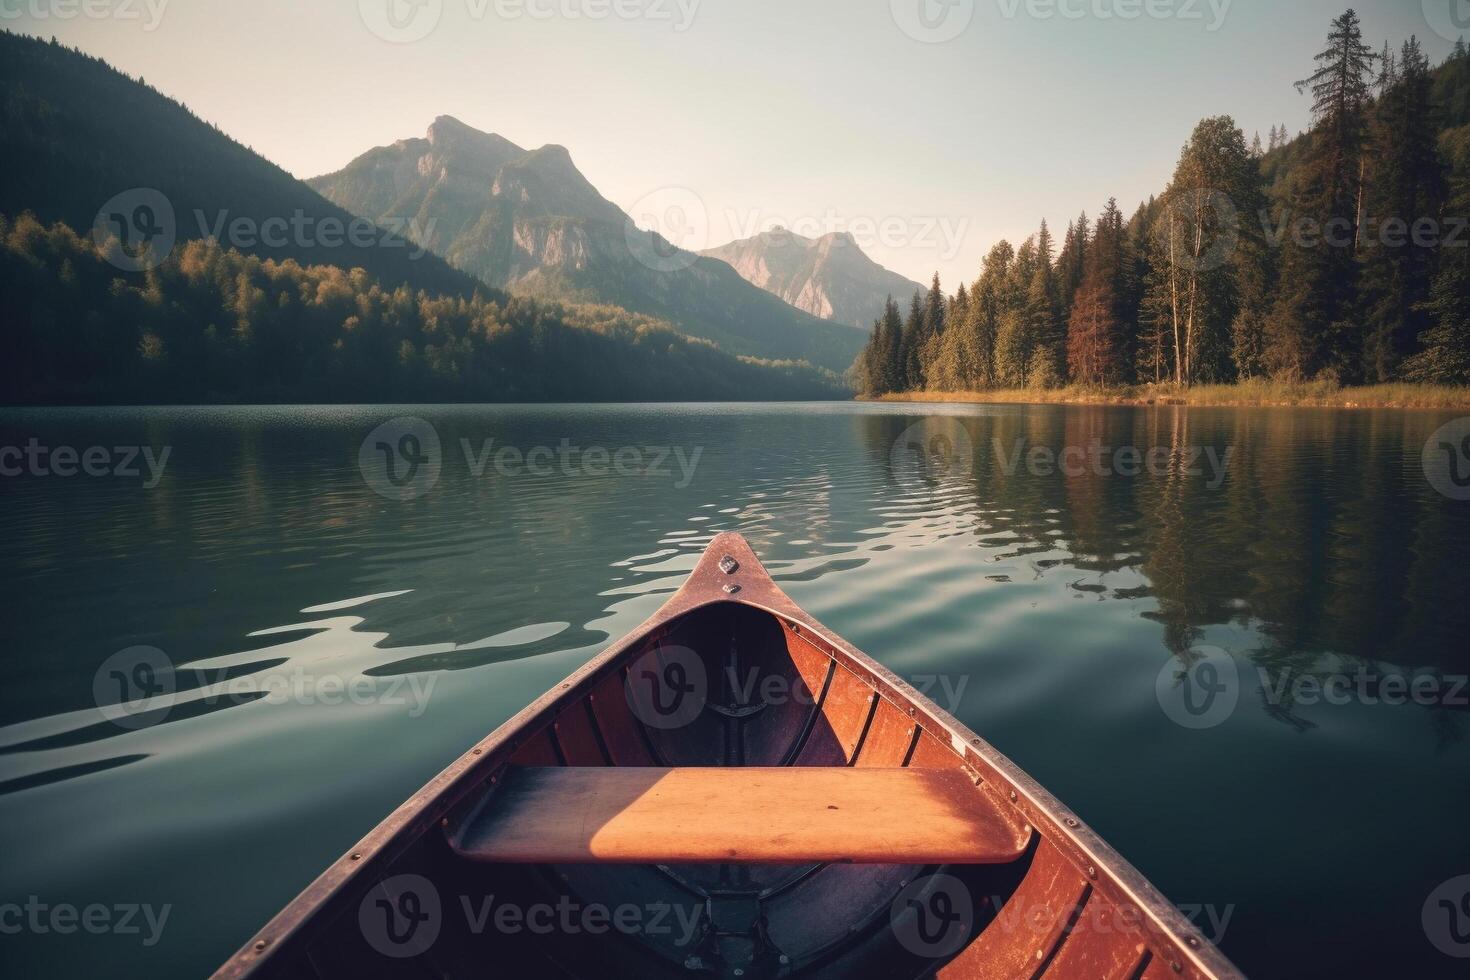 Canoe floating on a serene mountain lake surrounded by tall pine trees on a peaceful morning. photo